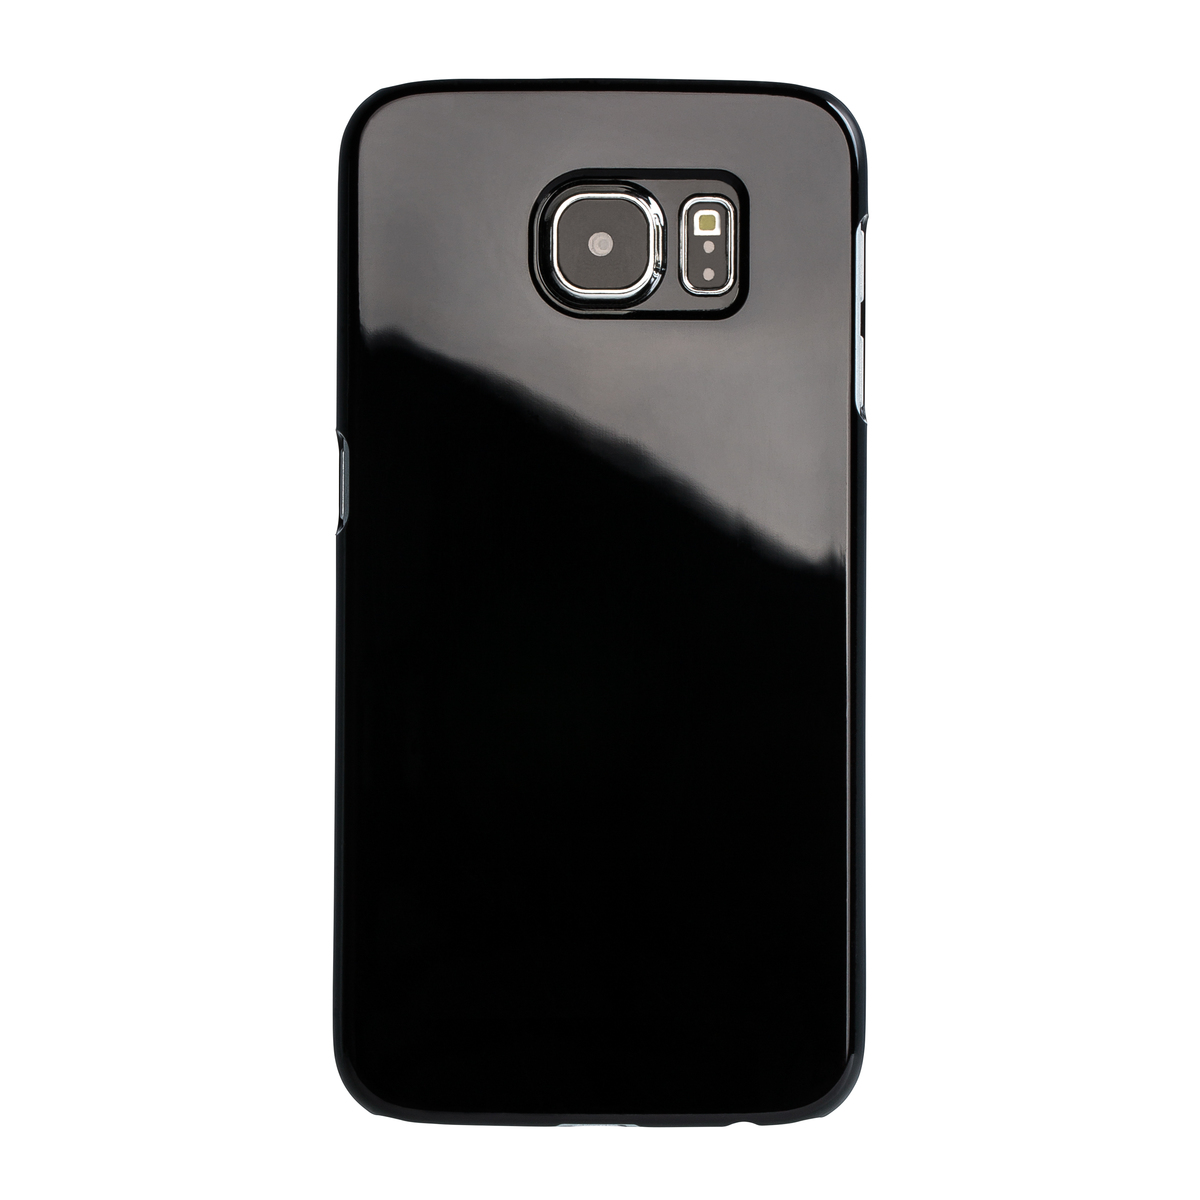 LM Smartphonecover REFLECTS-COVER XIV Galaxy S6 BLACK schwarz